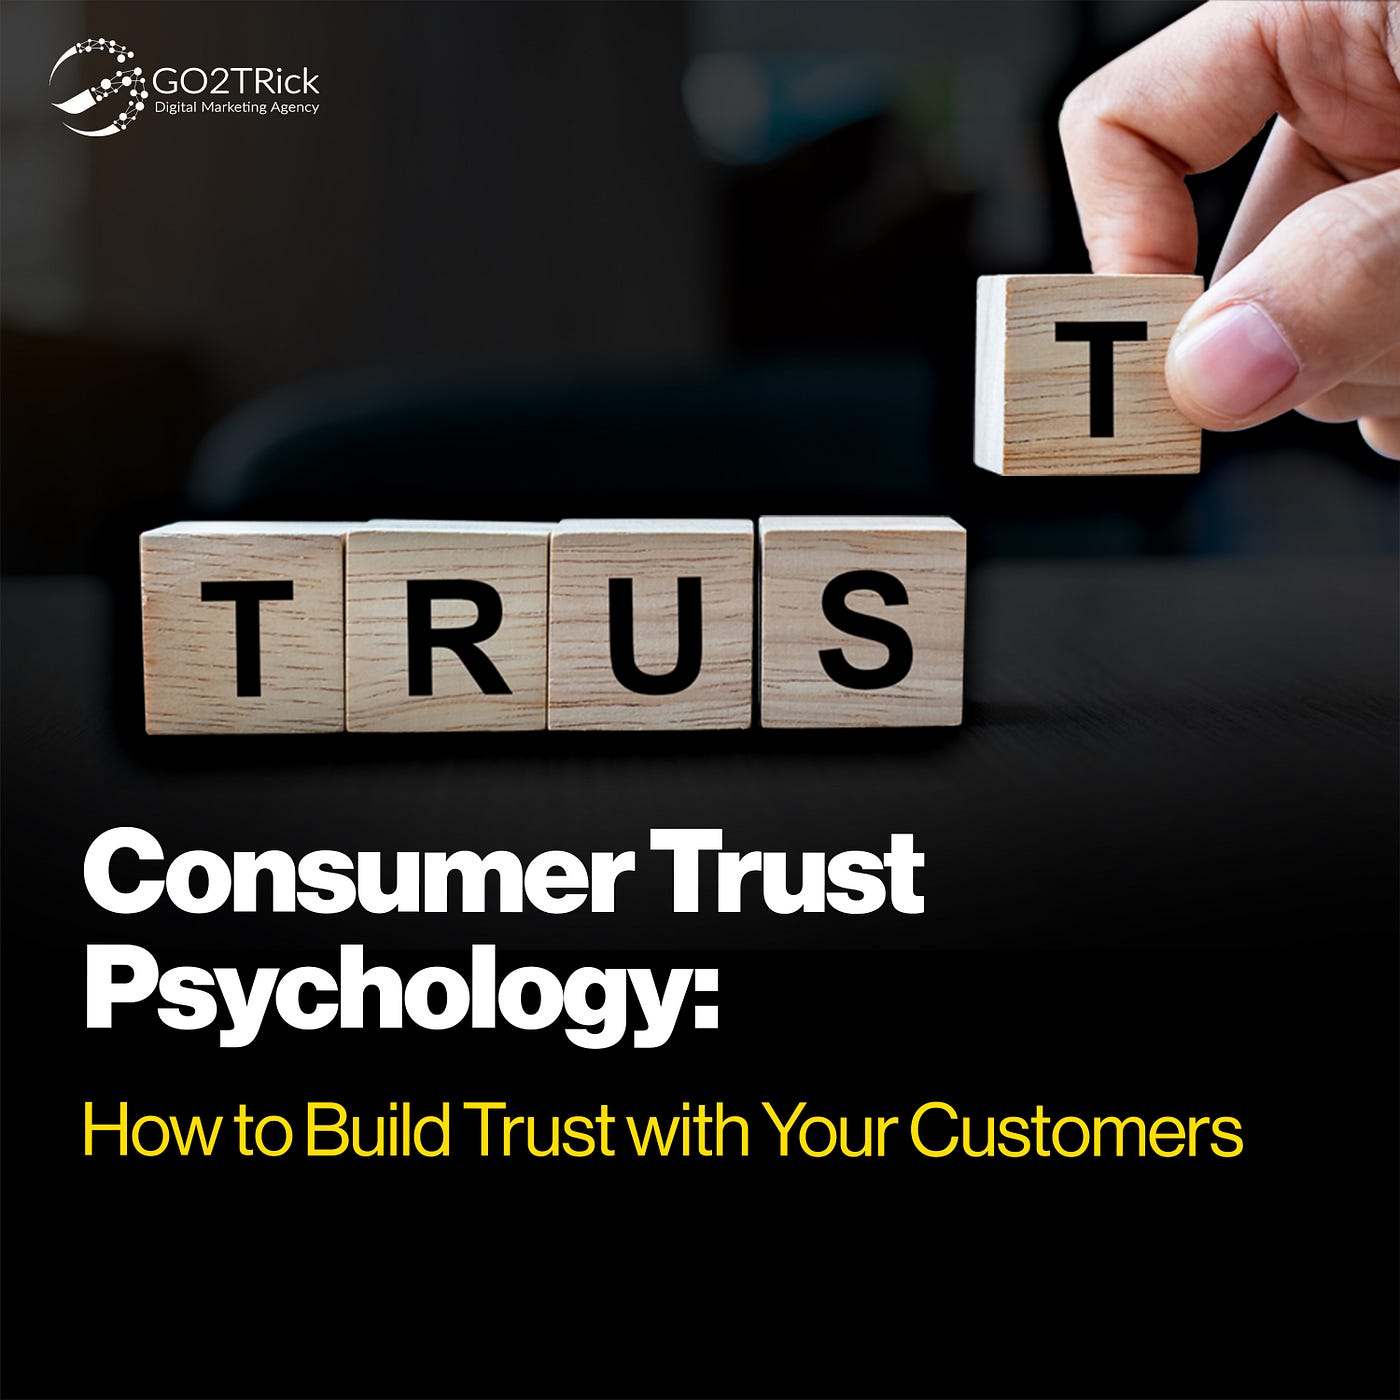 HOW TO CREATE TRUST IN YOUR MARKETING - Importance of building trust with consumers